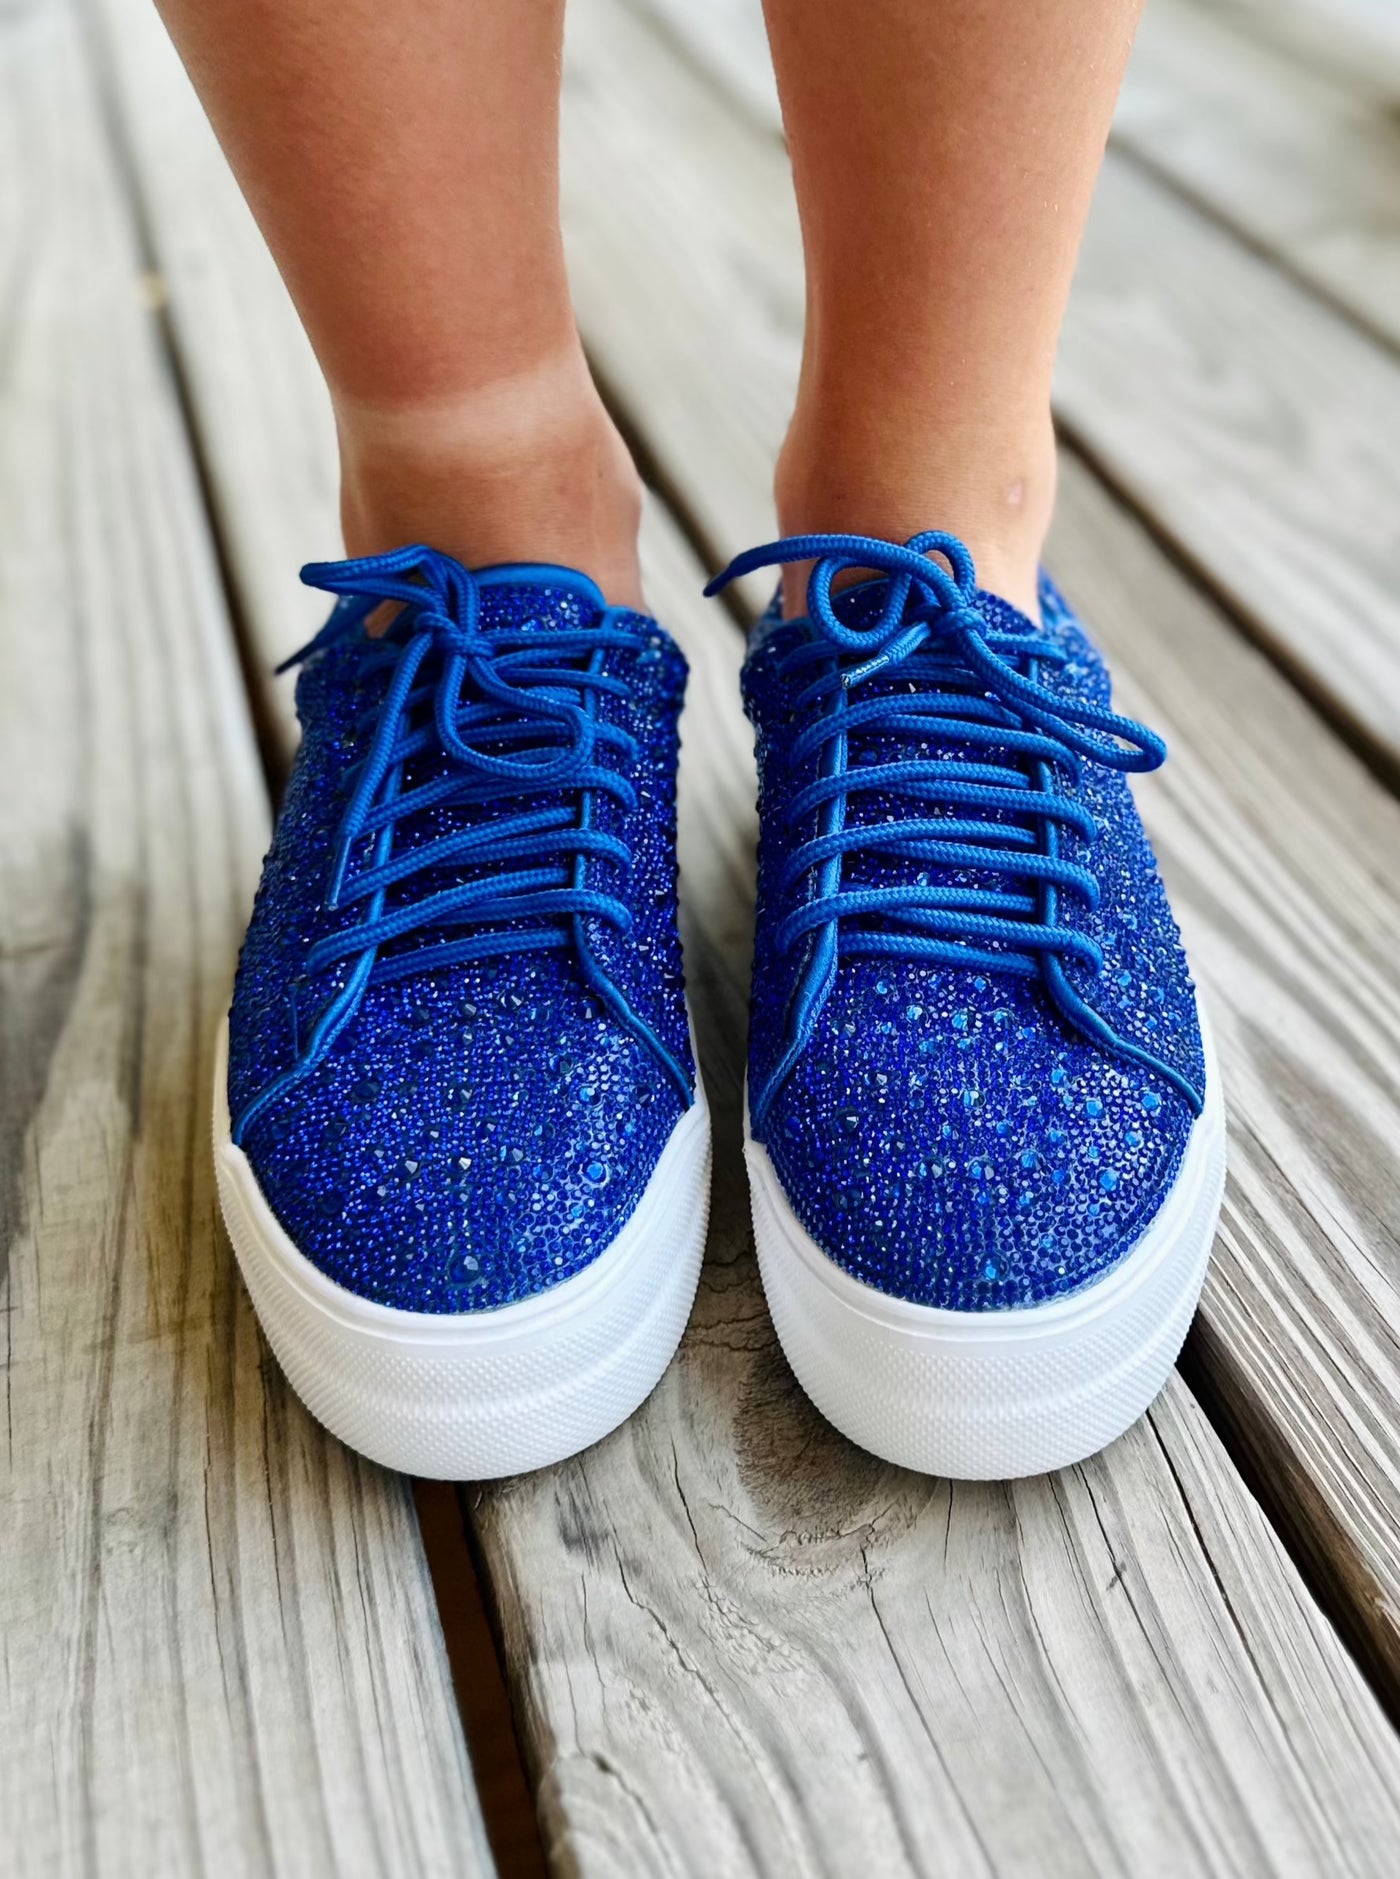 Corkys "Bedazzle" Sneakers in Royal Blue Final Sale